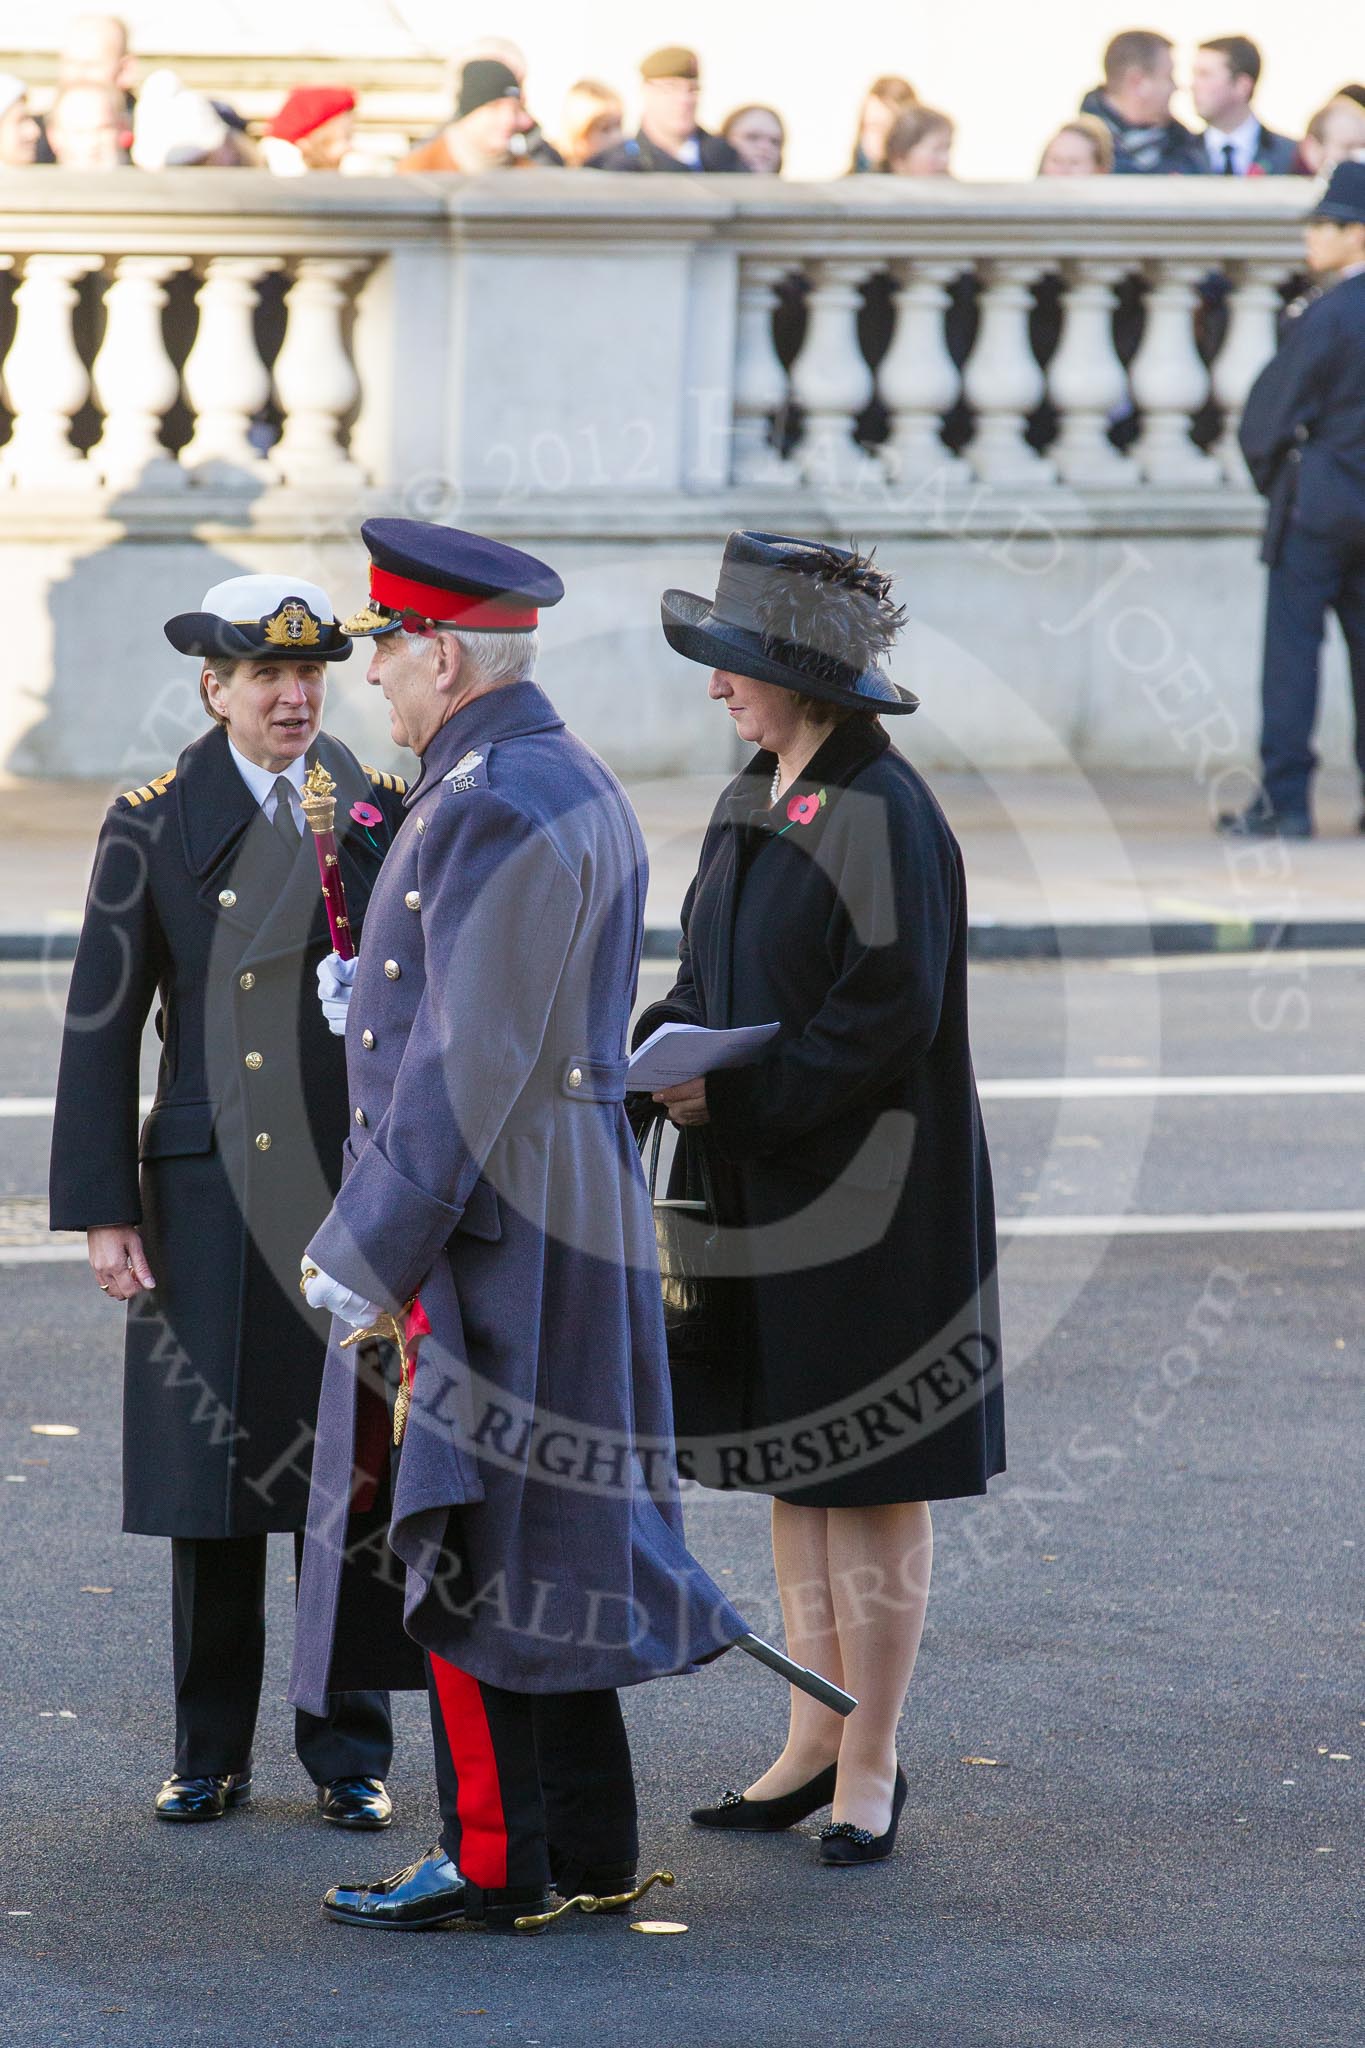 Field Marshall The Lord Guthrie of Craigiebank, who will lay a wreath later on behalf of the absent Prince of Wales, is talking to Commander Anne Sullivan, Royal Navy, Equerry to  the Princess Royal.